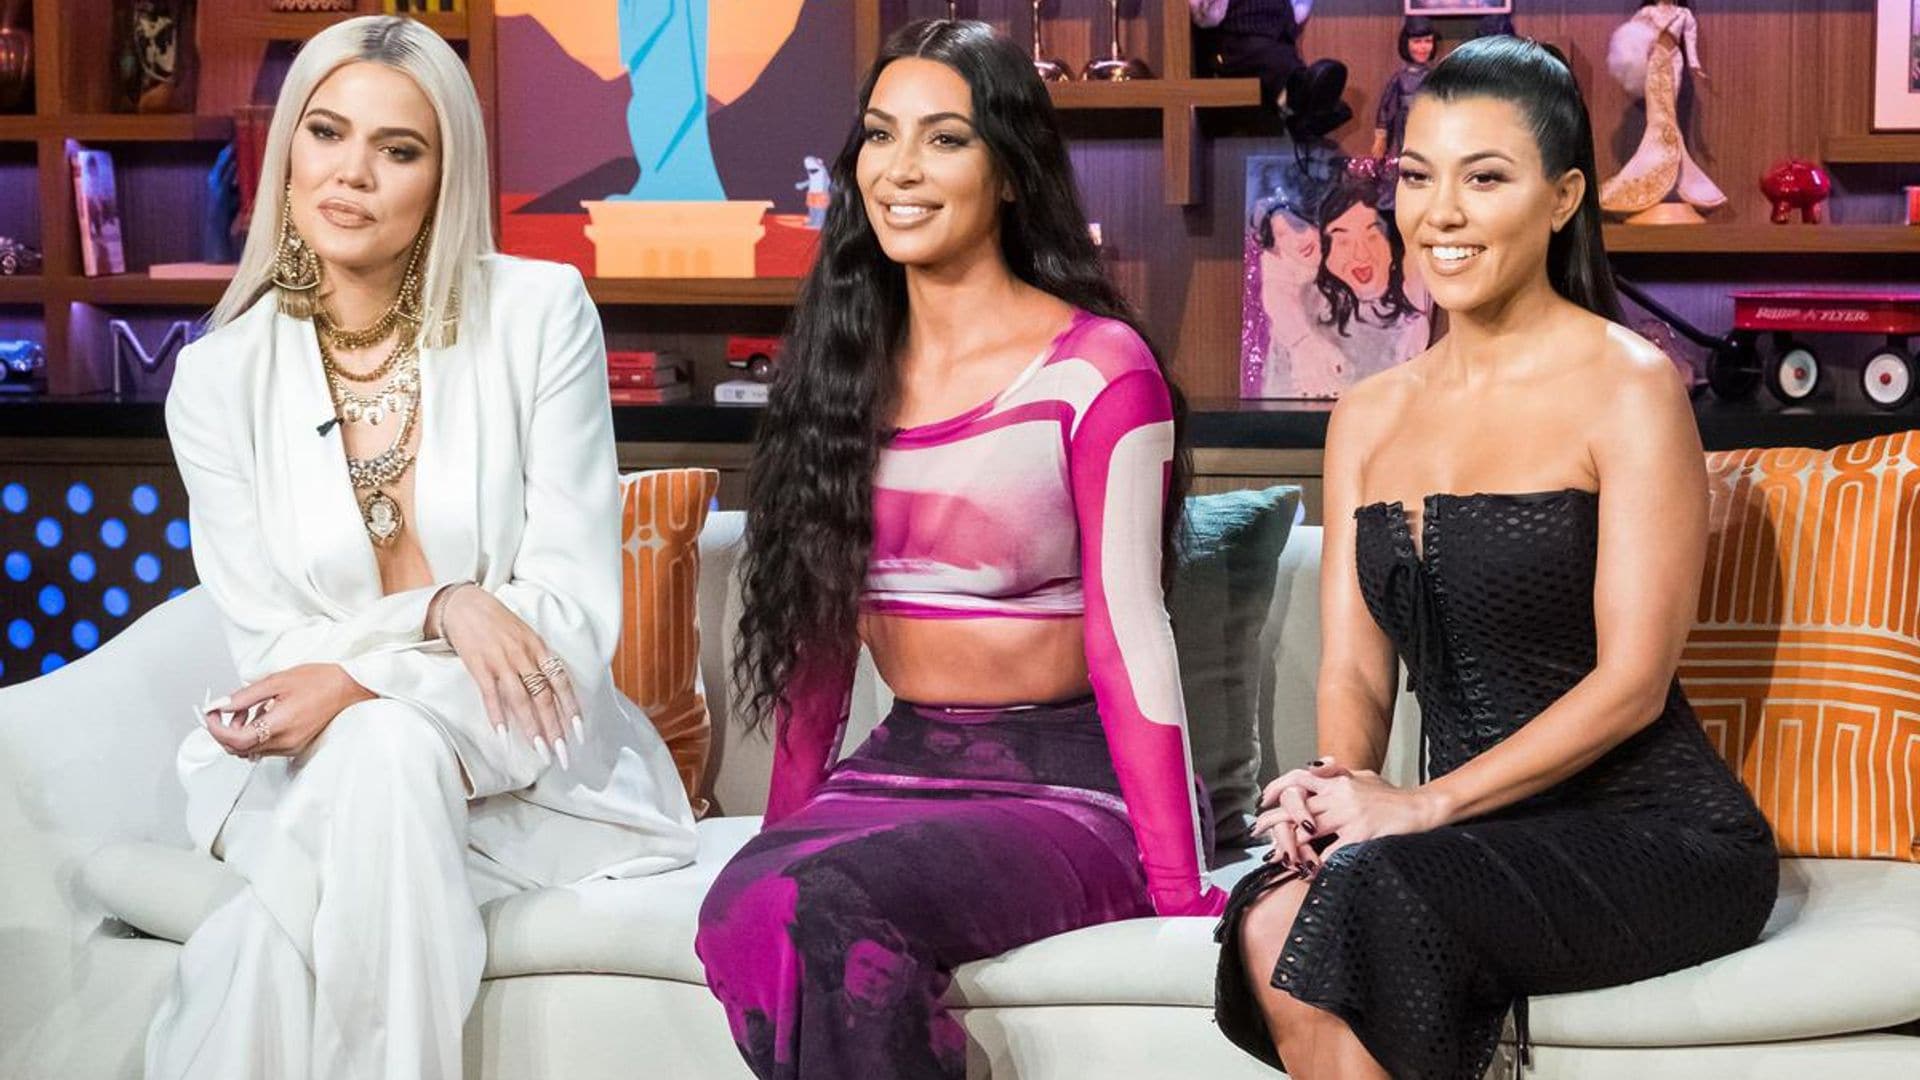 The reason why Khloé, Kourtney, and Kim Kardashian were concerned about Blac Chyna’s lawsuit